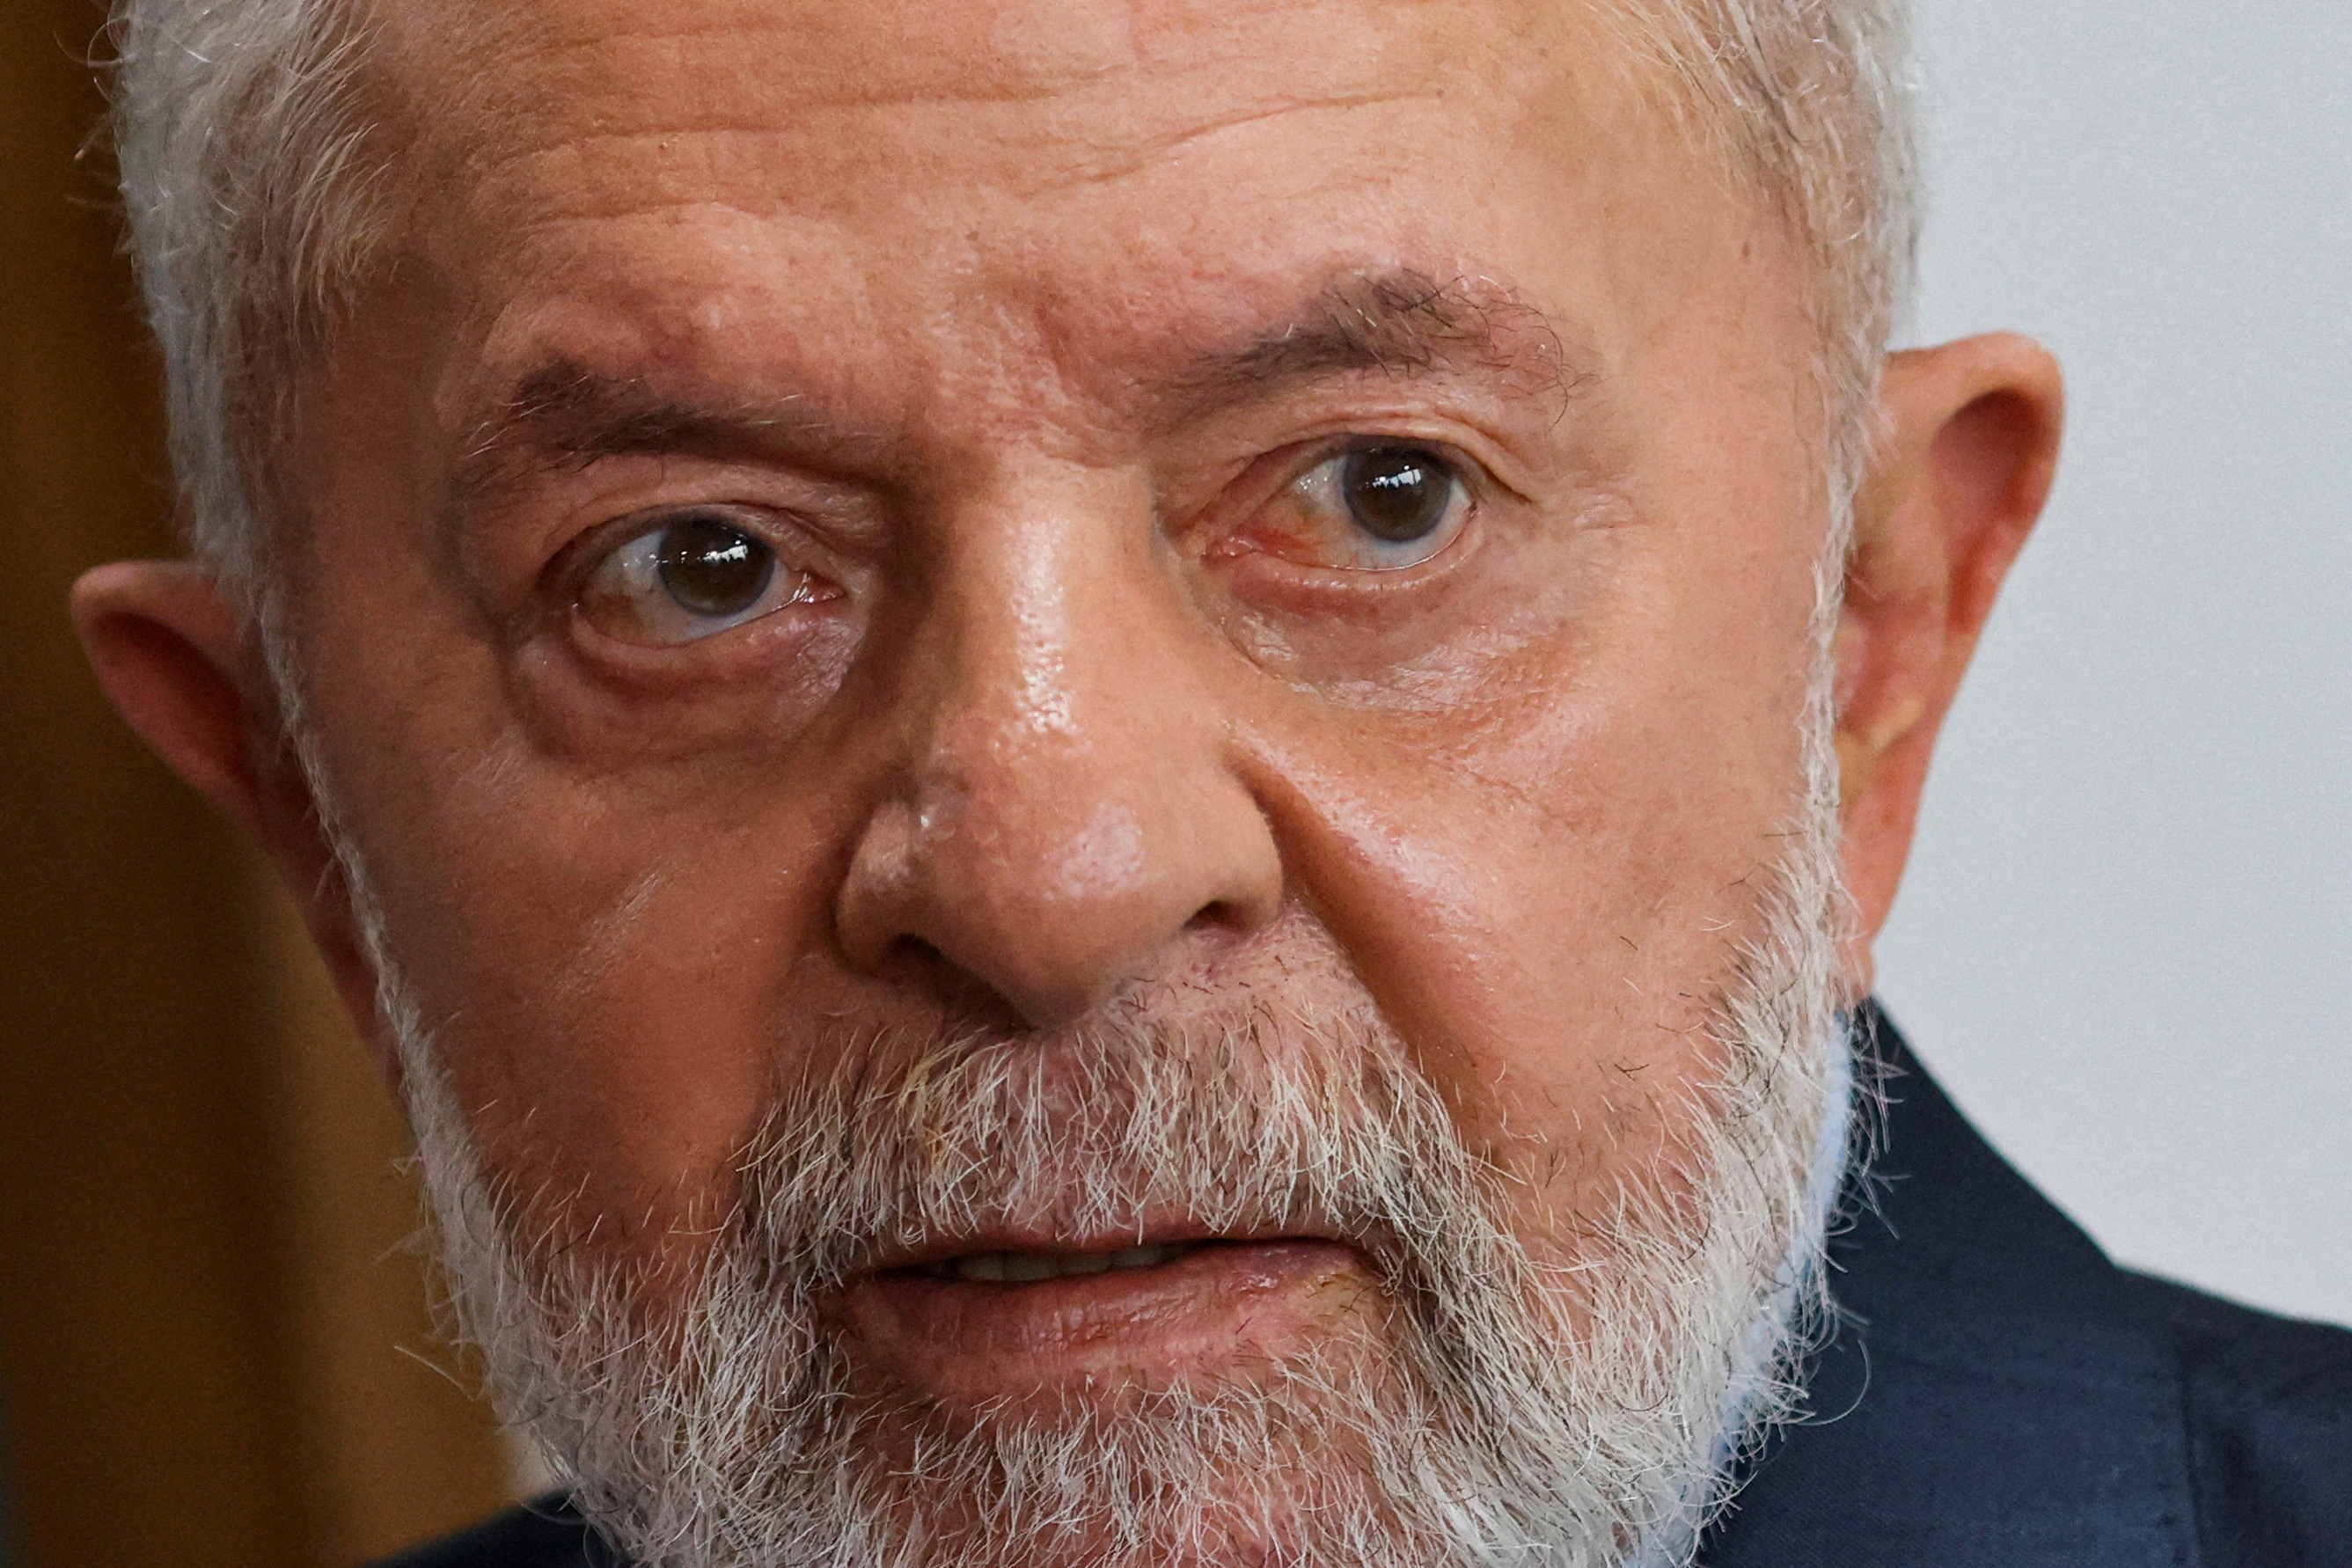 Sources say Lula has made up his mind about Petrobras' profits and wants investments